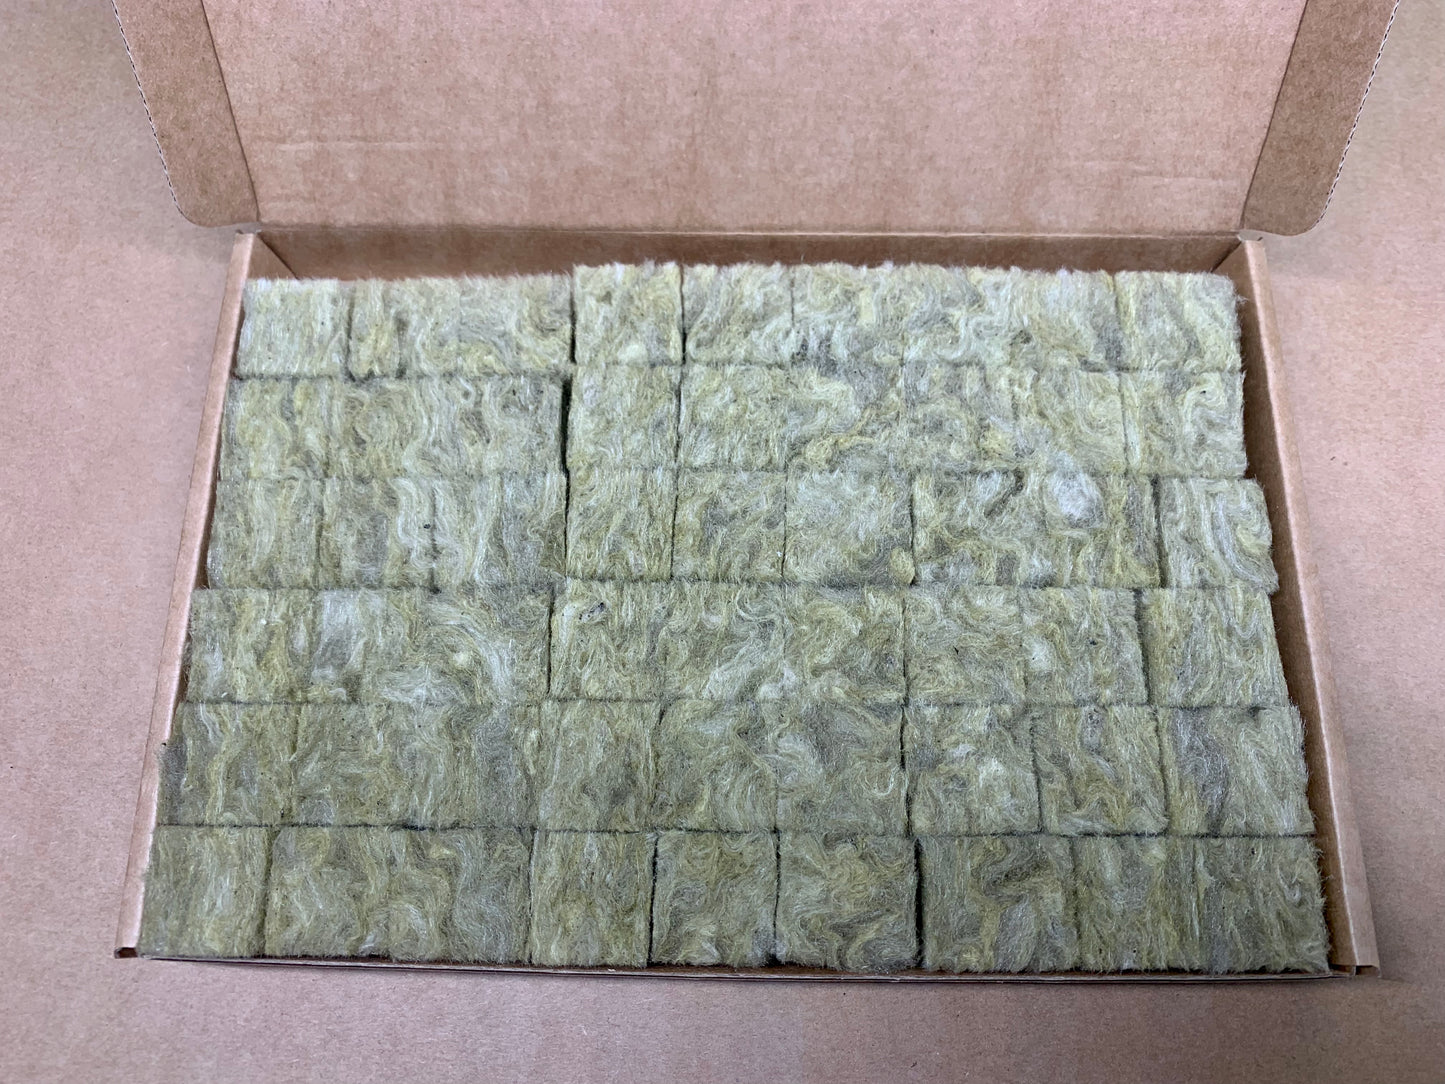 54 Rockwool 1 inch cubes for hydroponics seed-starting (Free standard postage)